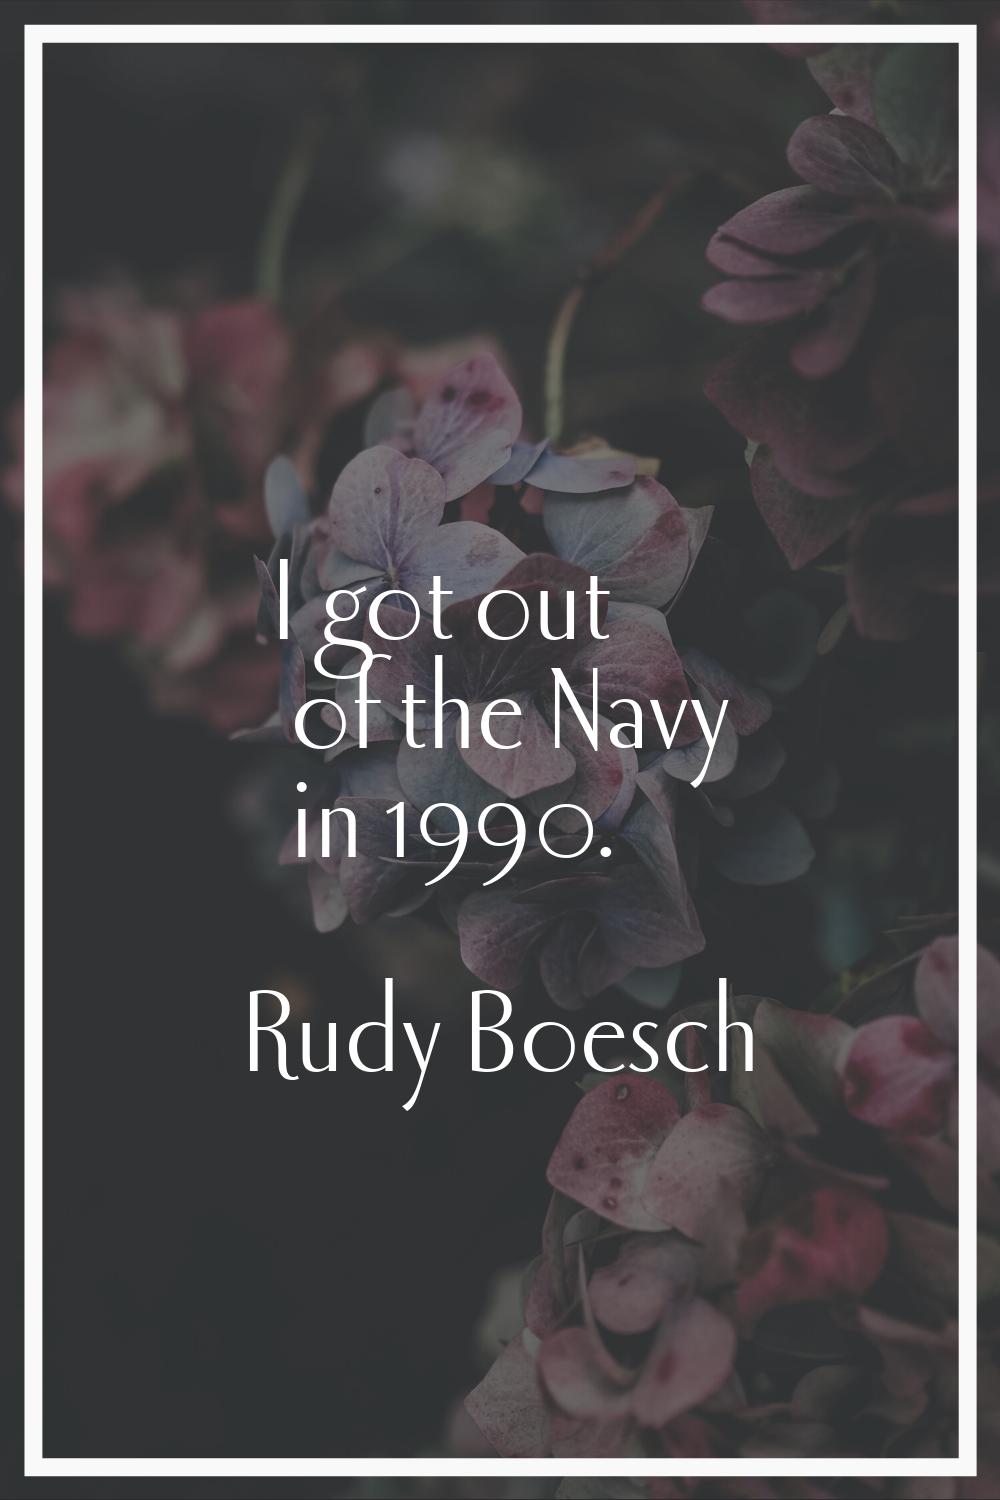 I got out of the Navy in 1990.